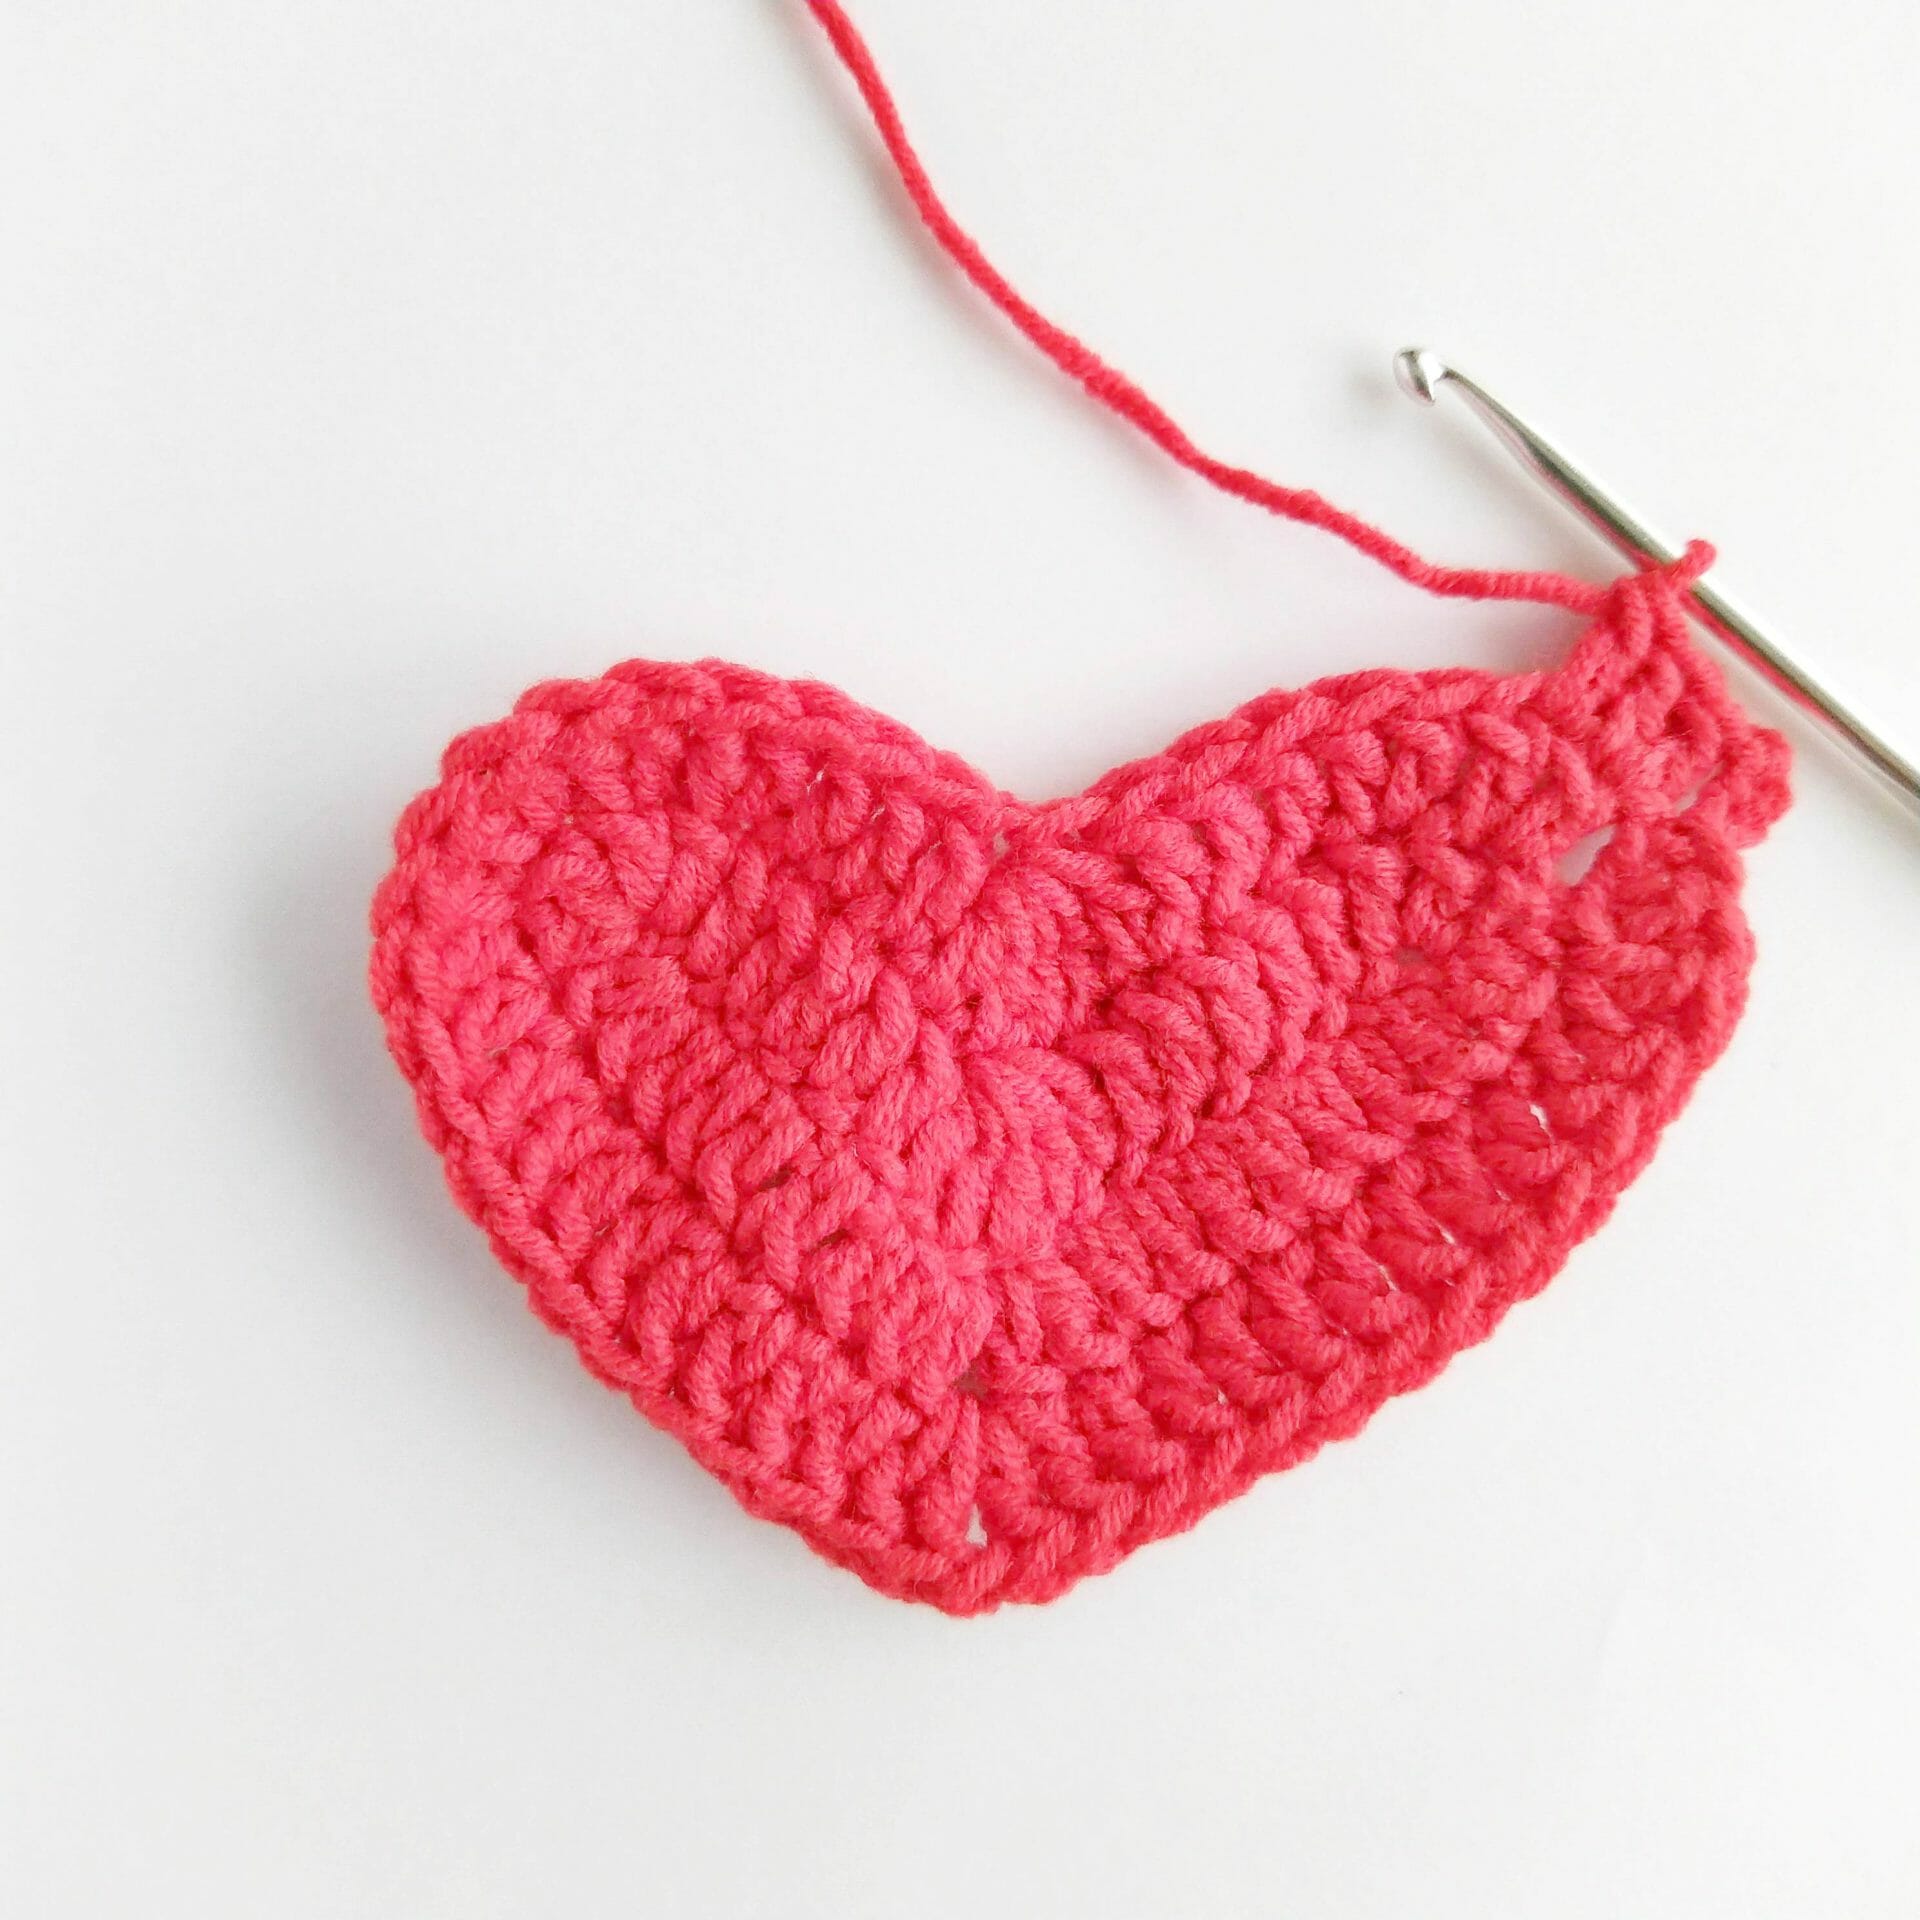 • Crochet heart coaster patterns for beginners • Listing includes: step by step instructions, photos of the process and diagram • Yarn: Sport, Baby, DK medium worsted (#2, #3) • Crochet hook: D/3 – E/4 (US) / 3 - 3.5 mm (EU) • Tutorial contains US and UK crocheting terms • Level: beginners